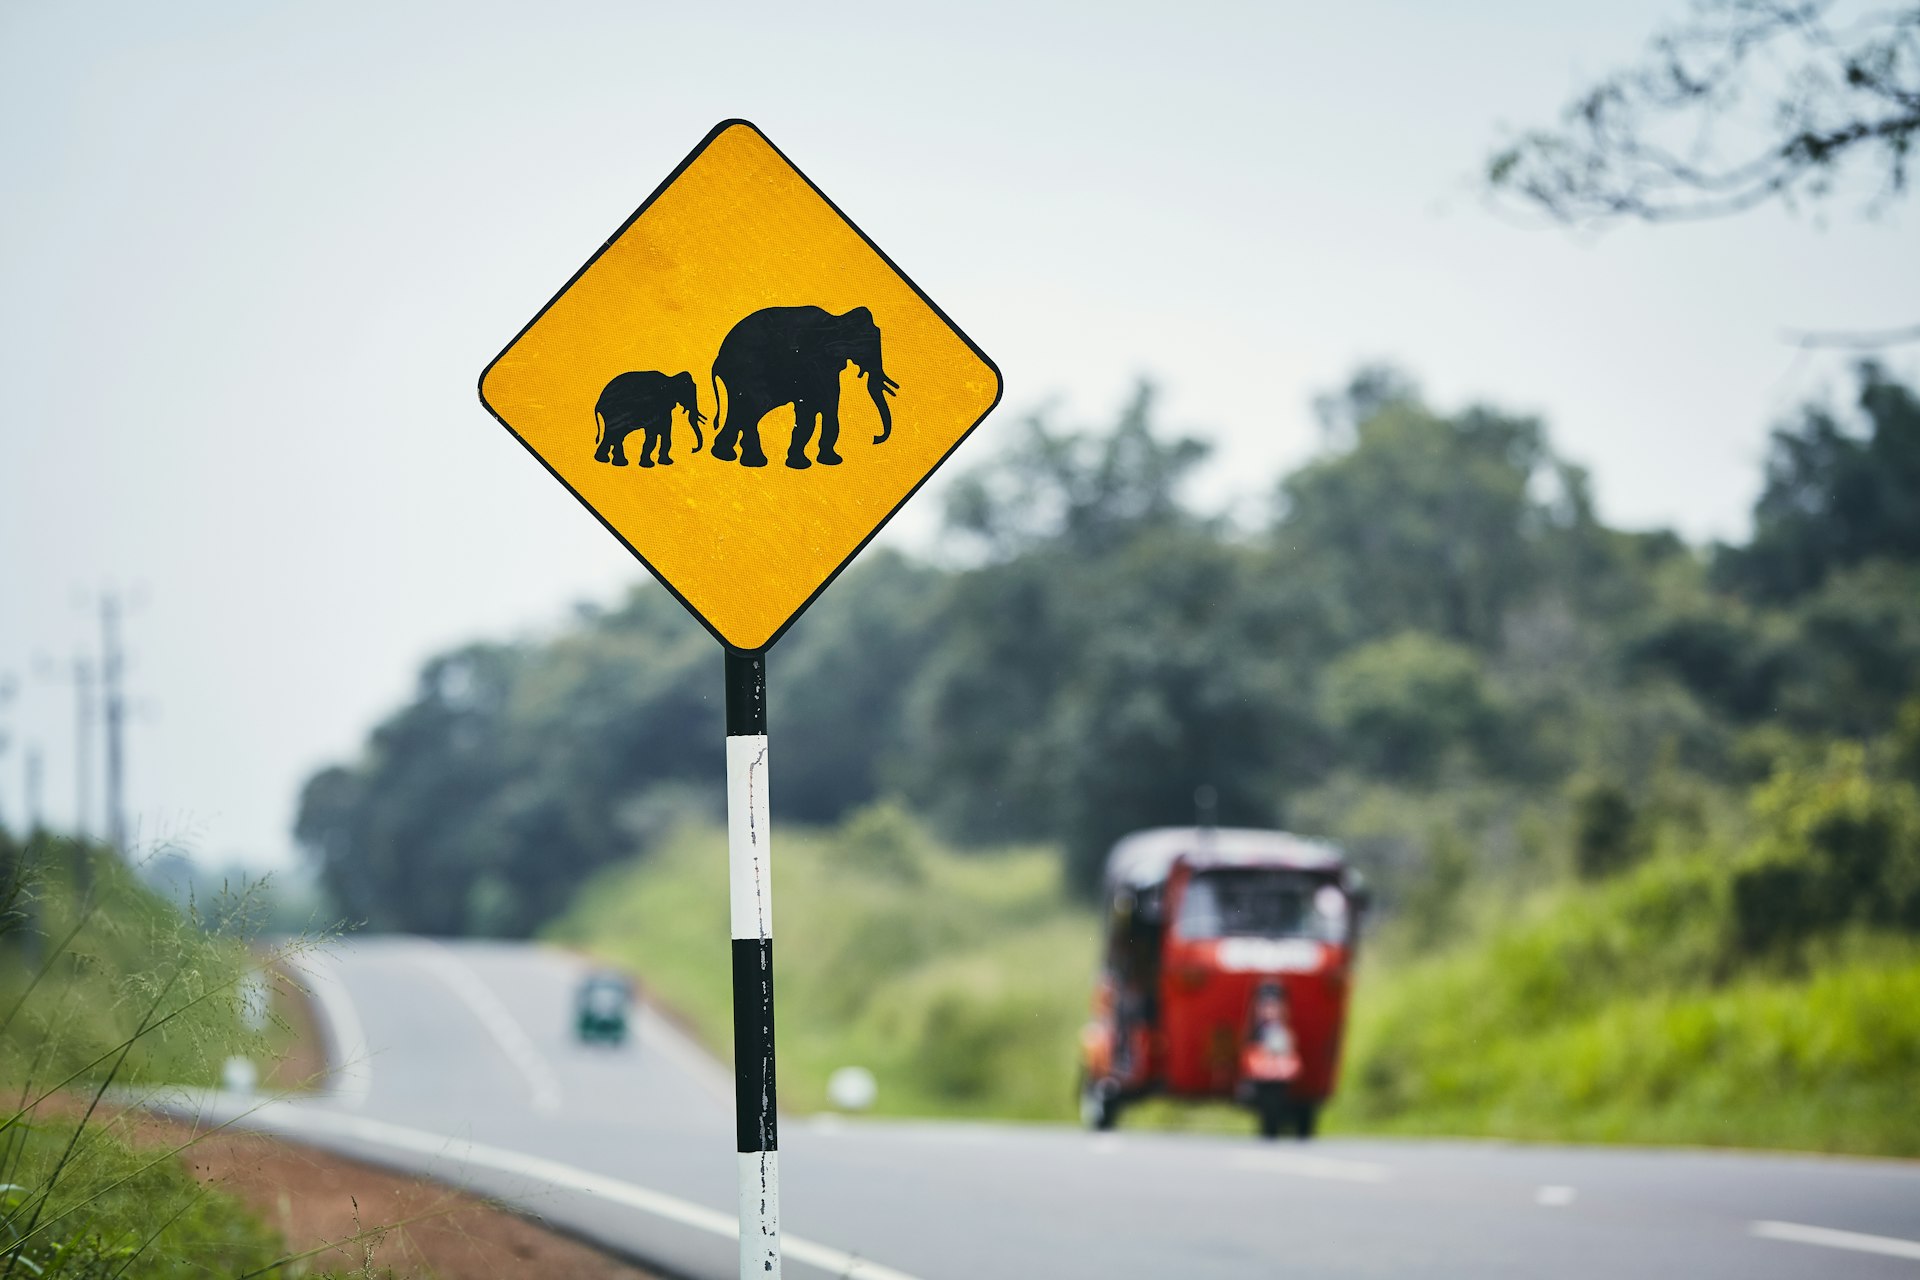 A yellow road warning sign showing two elephants 